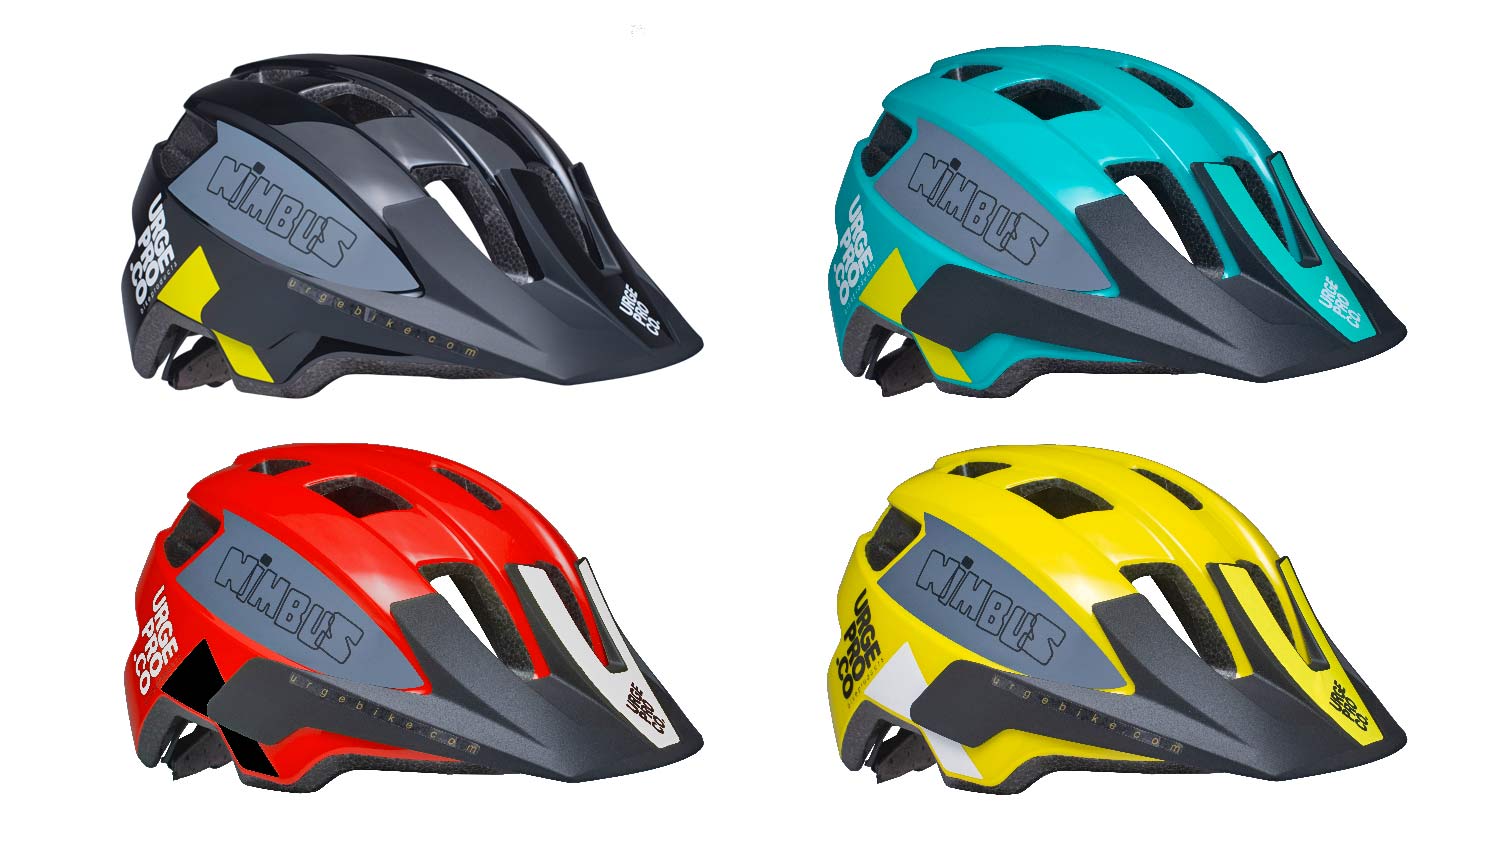 Urge Nimbus kids MTB helmet, affordable child-sized eco-friendly all-trail all-mountain bike head protection, colors